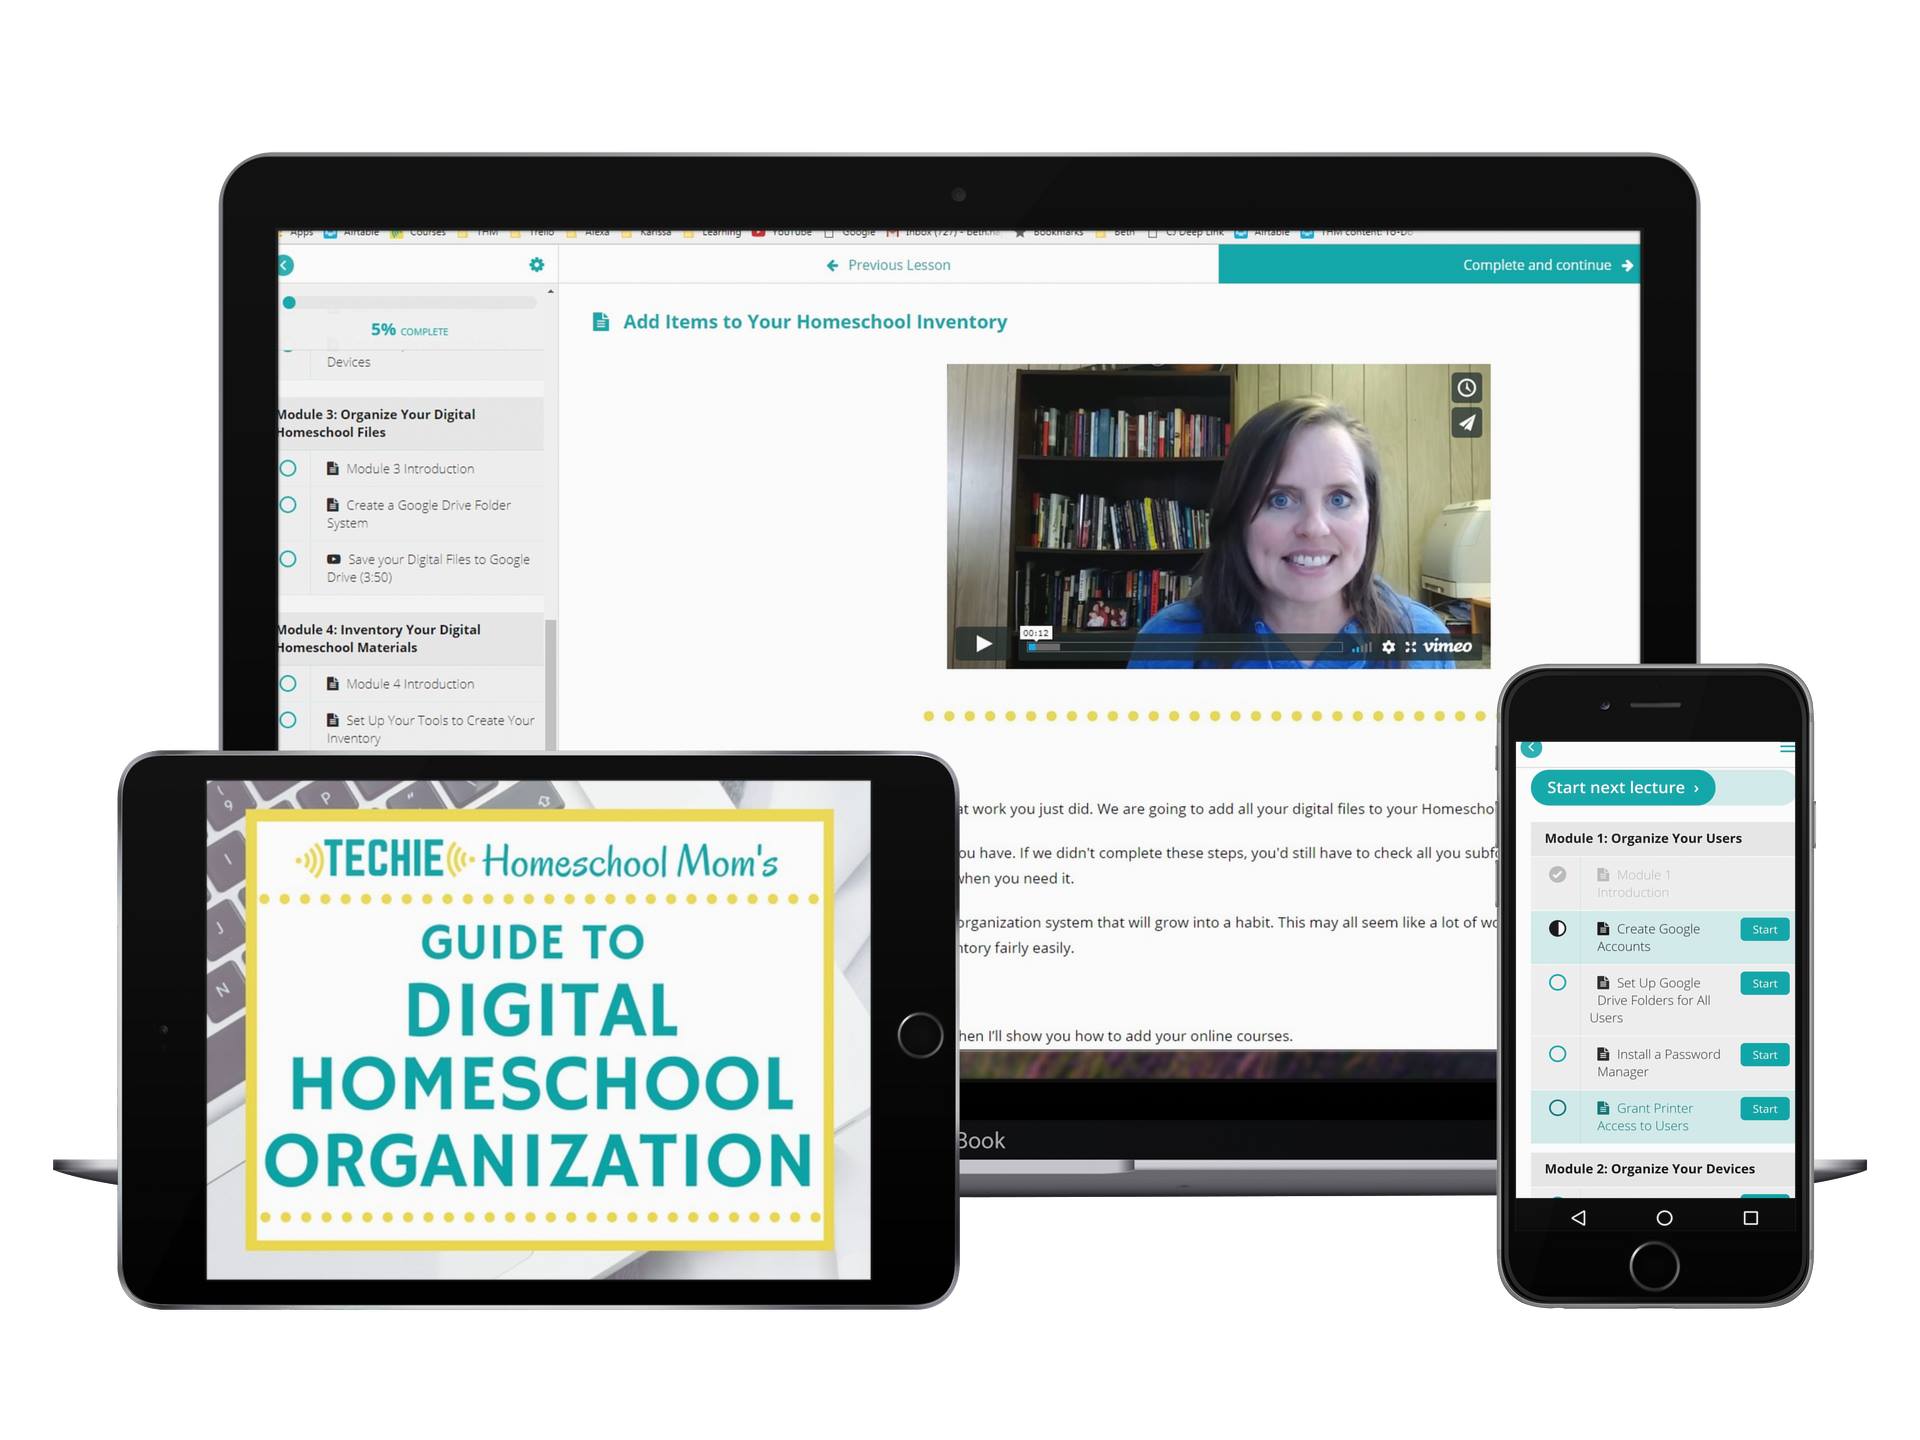 Get Organized with the Guide to Digital Homeschool Organization eCourse